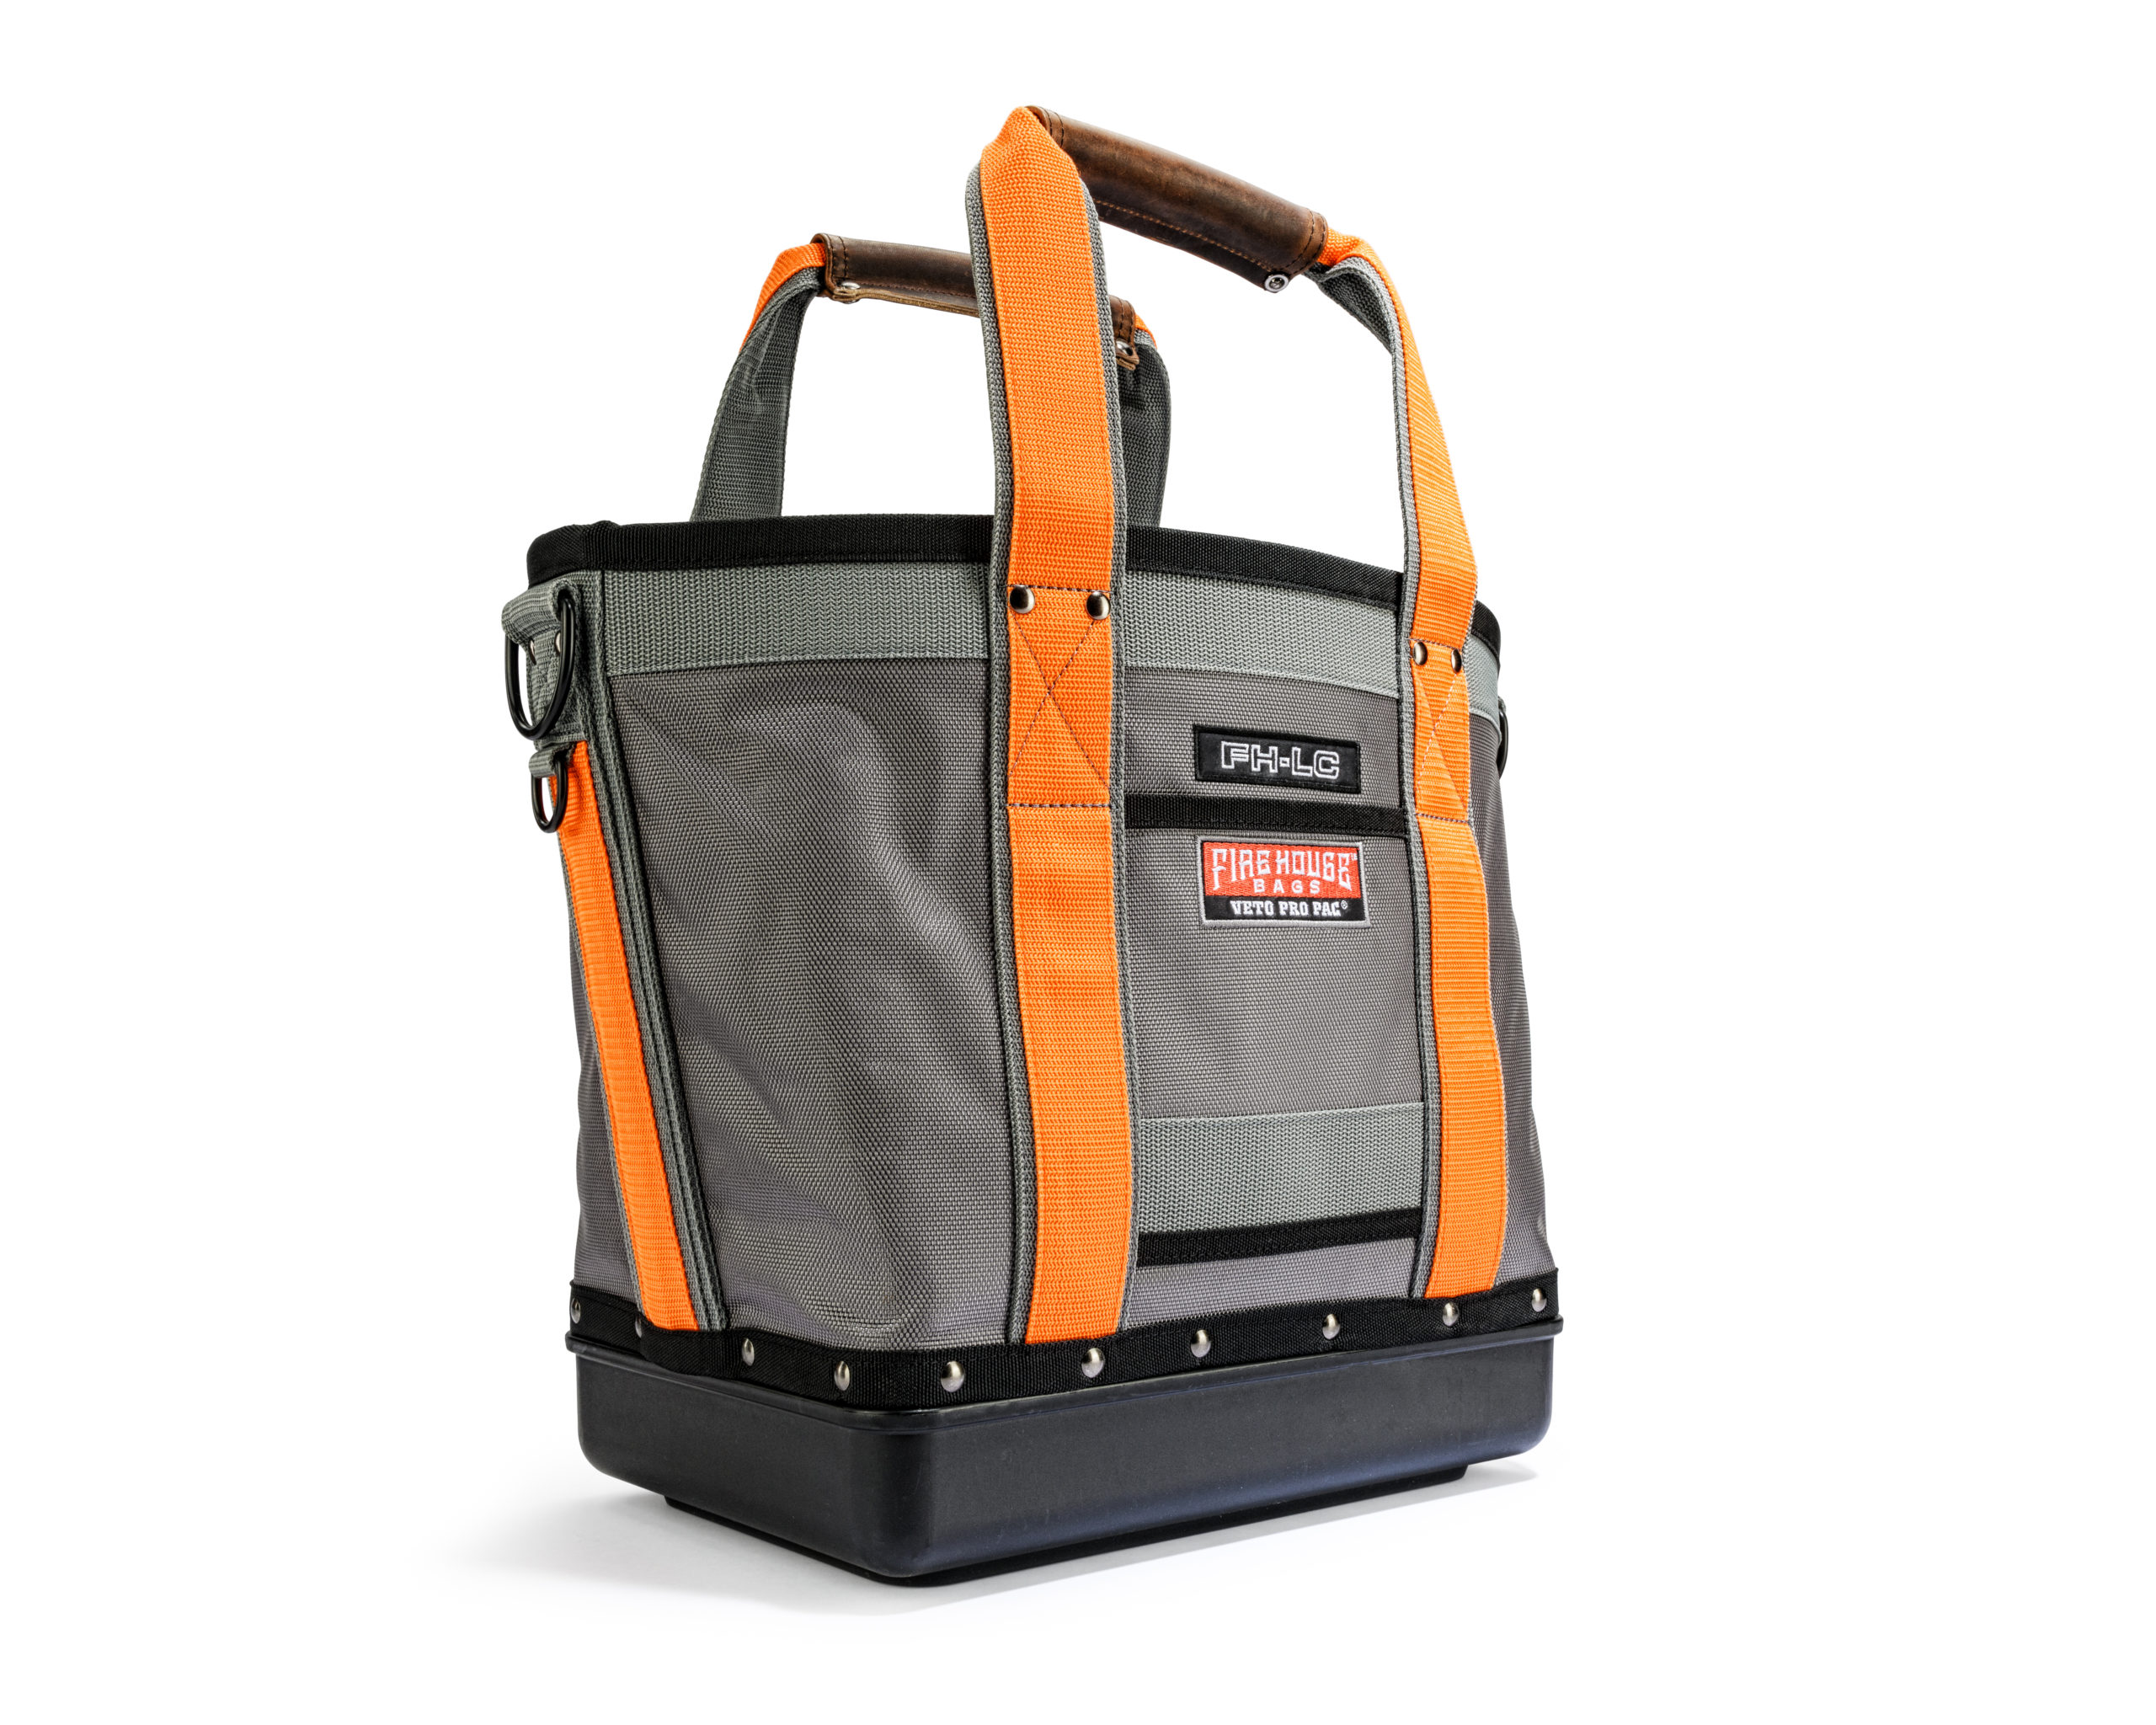 FH-LC Firehouse Tote Bag for Tool Storage VetoProPac